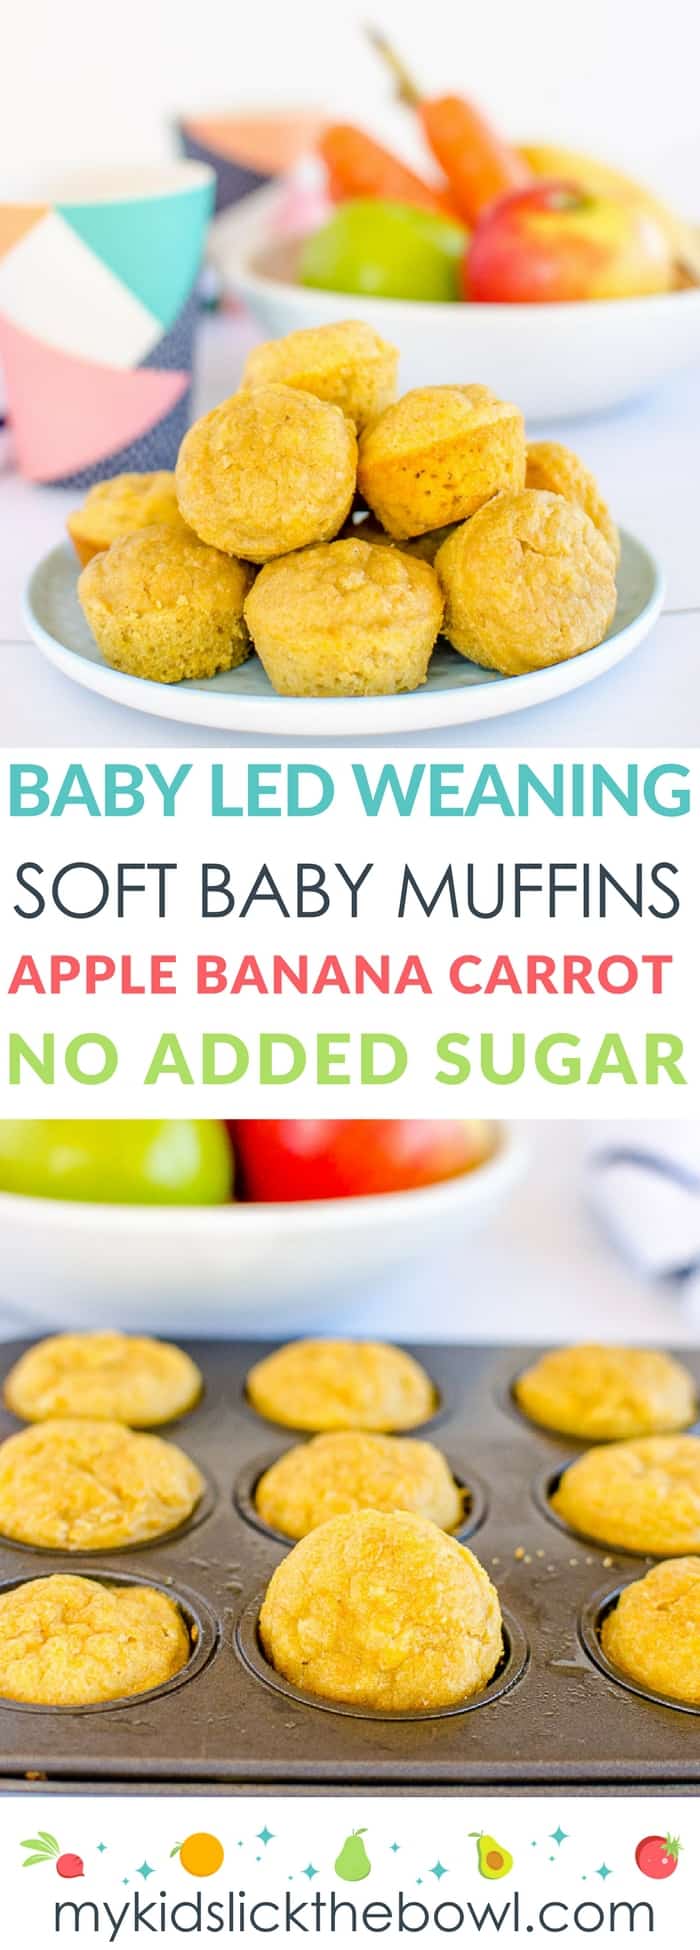 Baby Led Weaning Muffins No Sugar Healthy For Kids Soft Baby Muffin Apple Banana and Carrot.